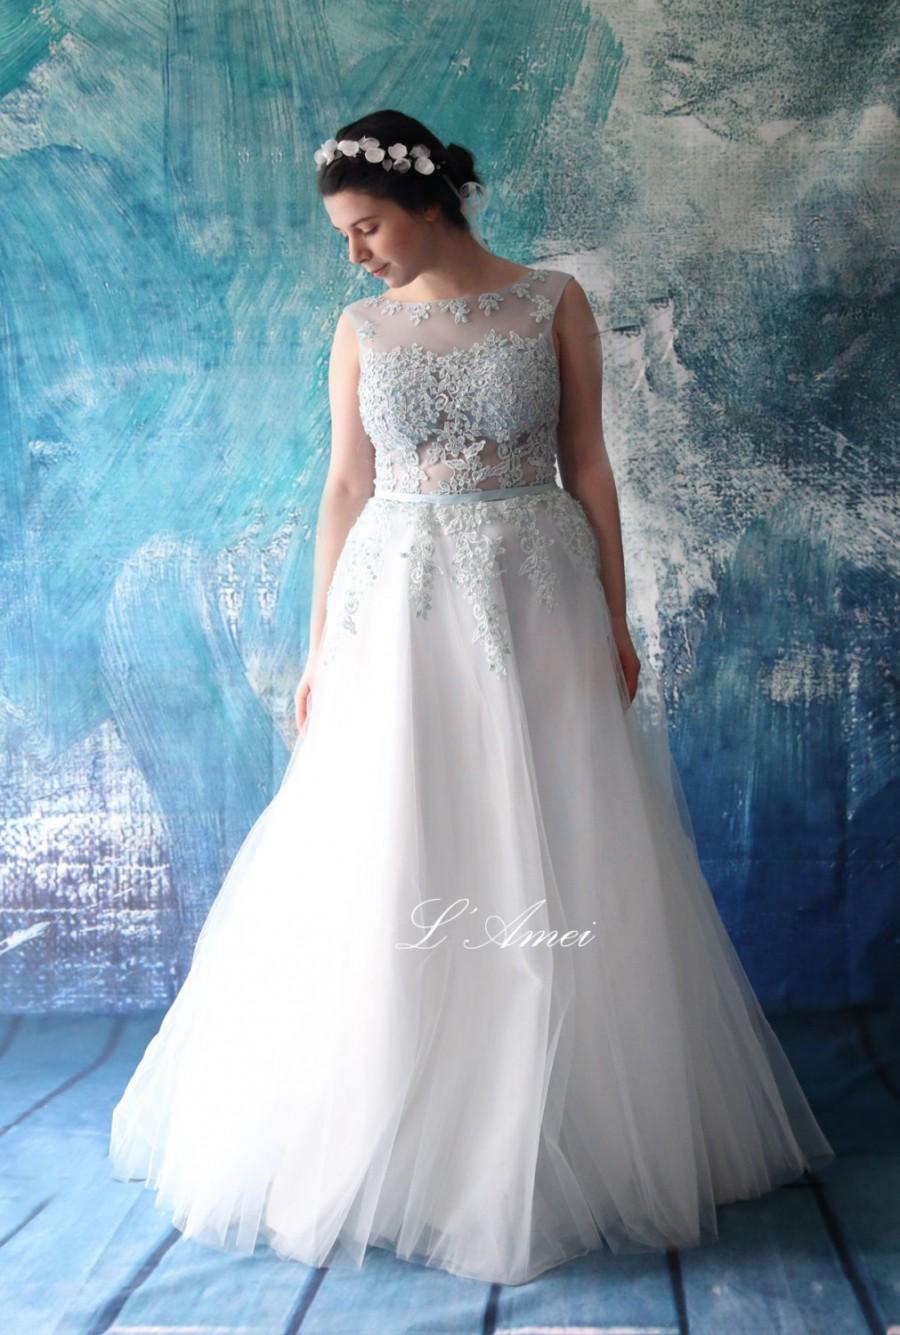 Wedding - Stunning Light Blue Lace and Tulle Open Back Wedding Dress - AM 1958020